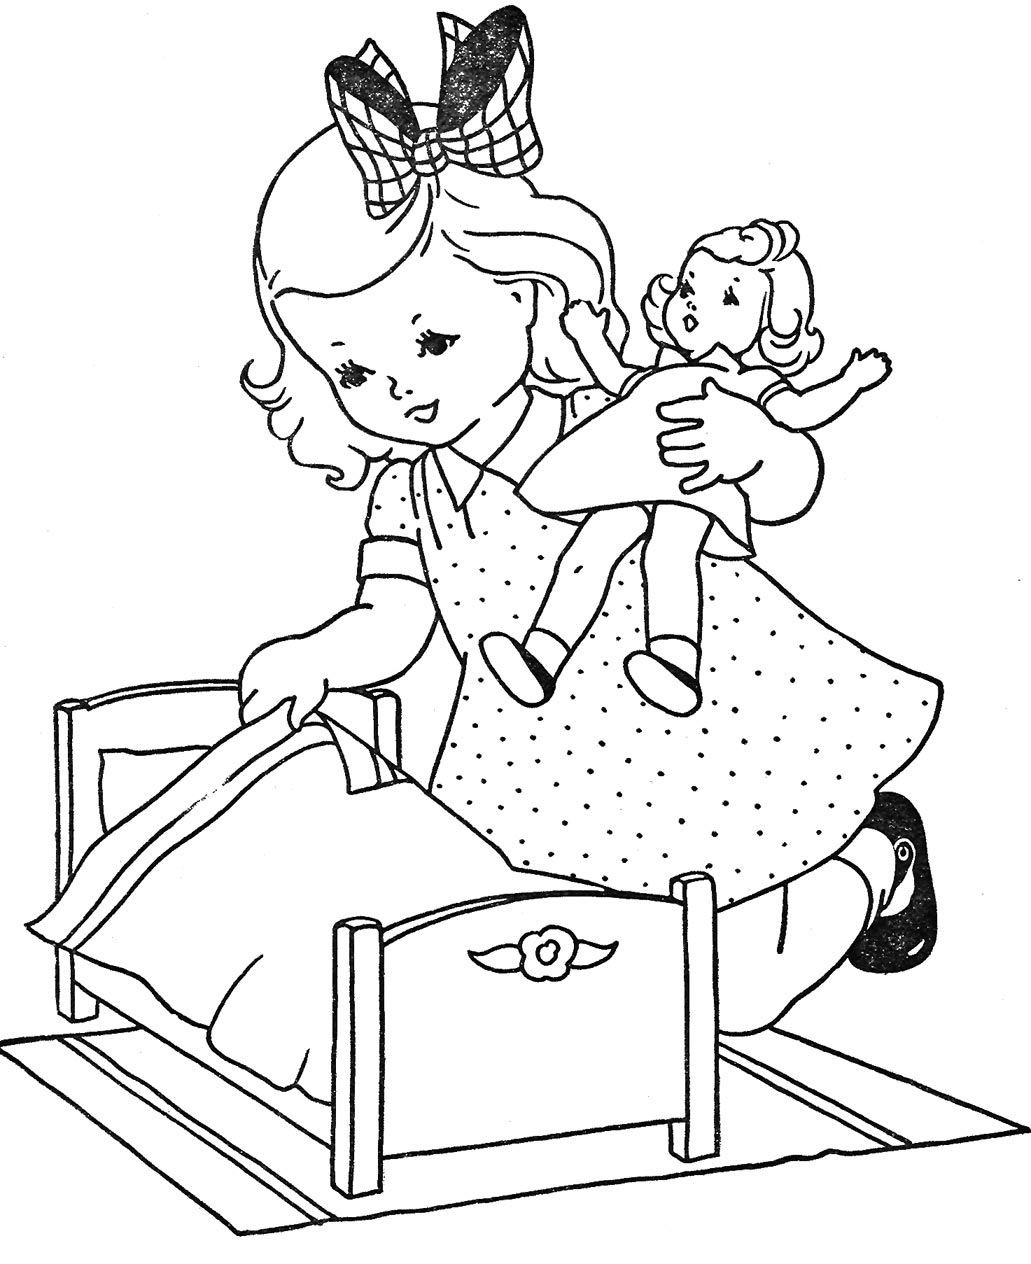 Coloring Pages Of Boys And Girls
 Cute coloring pages for girls and boys Double click on